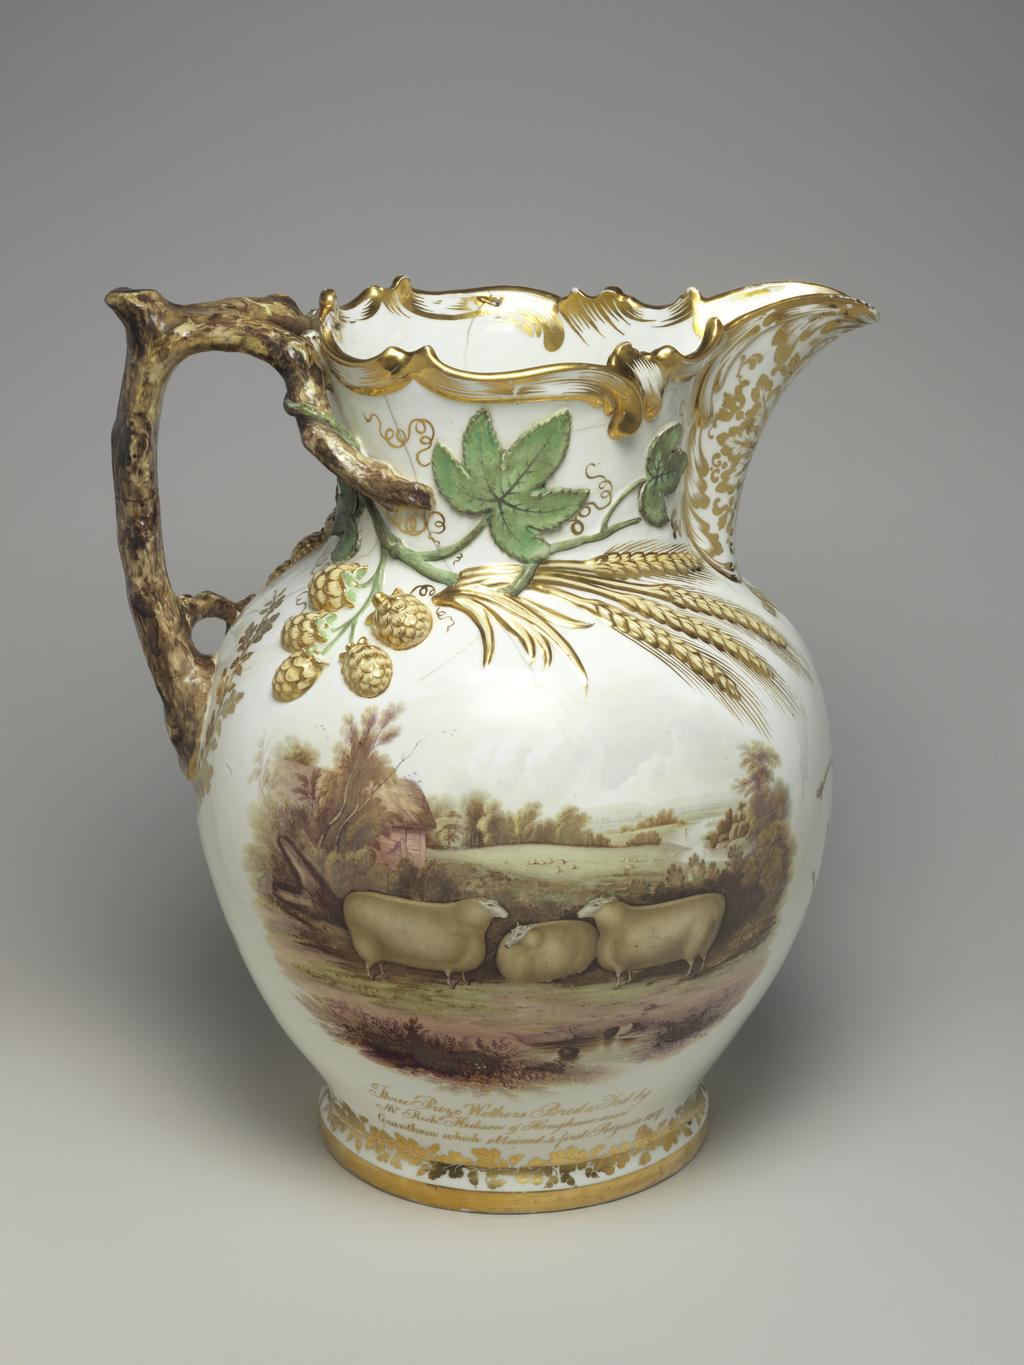 An image of Jug/Ale Jug. Commemorative Jug. Coalport Porcelain Factory, Shropshire. Feltspar. The bulbous body has a projecting base, a cylindrical neck with relief scrolls around the rim, an upward curving lip, and an angular branch handle which divides into two at the top and has a lateral twig on the left of the lower end. Both sides of the neck and shoulder are decorated with sprays of applied hops and barley extending from the upper ends of the handle towards the lip. One side of the body is painted with a view of a massive ox standing facing to the right in a landscape, with below in gold, 'Earl Spencers Prize Durham Ox/exhibited at the Smithfield Club Show/Xmas 1843'. On the other side there are three wethers (castrated male sheep), one facing front and two facing inwards on either side of it, standing in a landscape with below in gold 'Three Prize Wethers Bred & Fed by/Mr Richd. Hickson of Hougham near/Grantham which attained 4 first Prizes in 1837'. Below the lip there is a group of agricultural implements comprising a sickle, scythe, rake, pitchfork, plough and harrow ?, and below the handle, a stook of corn. The base and the lower end of the handle are encircled by wreaths of oak leaves and acorns, and there is a formal leaf design under the lip. The scrolls on the rim are gilded and there is a broad gold band round the edge of the base. Soft-paste porcelain, moulded in two halves, with applied moulded reliefs, applied moulded handle, and feldspathic glaze, painted overglaze in enamels and gilded. Height, whole, 46.3 cm, height, whole, 45.7 cm, width, whole, 38 cm, circa 1844. Rococo Revival. Circular pink 'gold medal' mark. Notes: The term 'feltspar porcelain' in the mark on the base of the jug refers to the lead-free glaze for which John Rose & Co. won a Society of Arts Gold Medal on 30 May 1820, rather than to the body of the ware, which was a soft-paste porcelain.